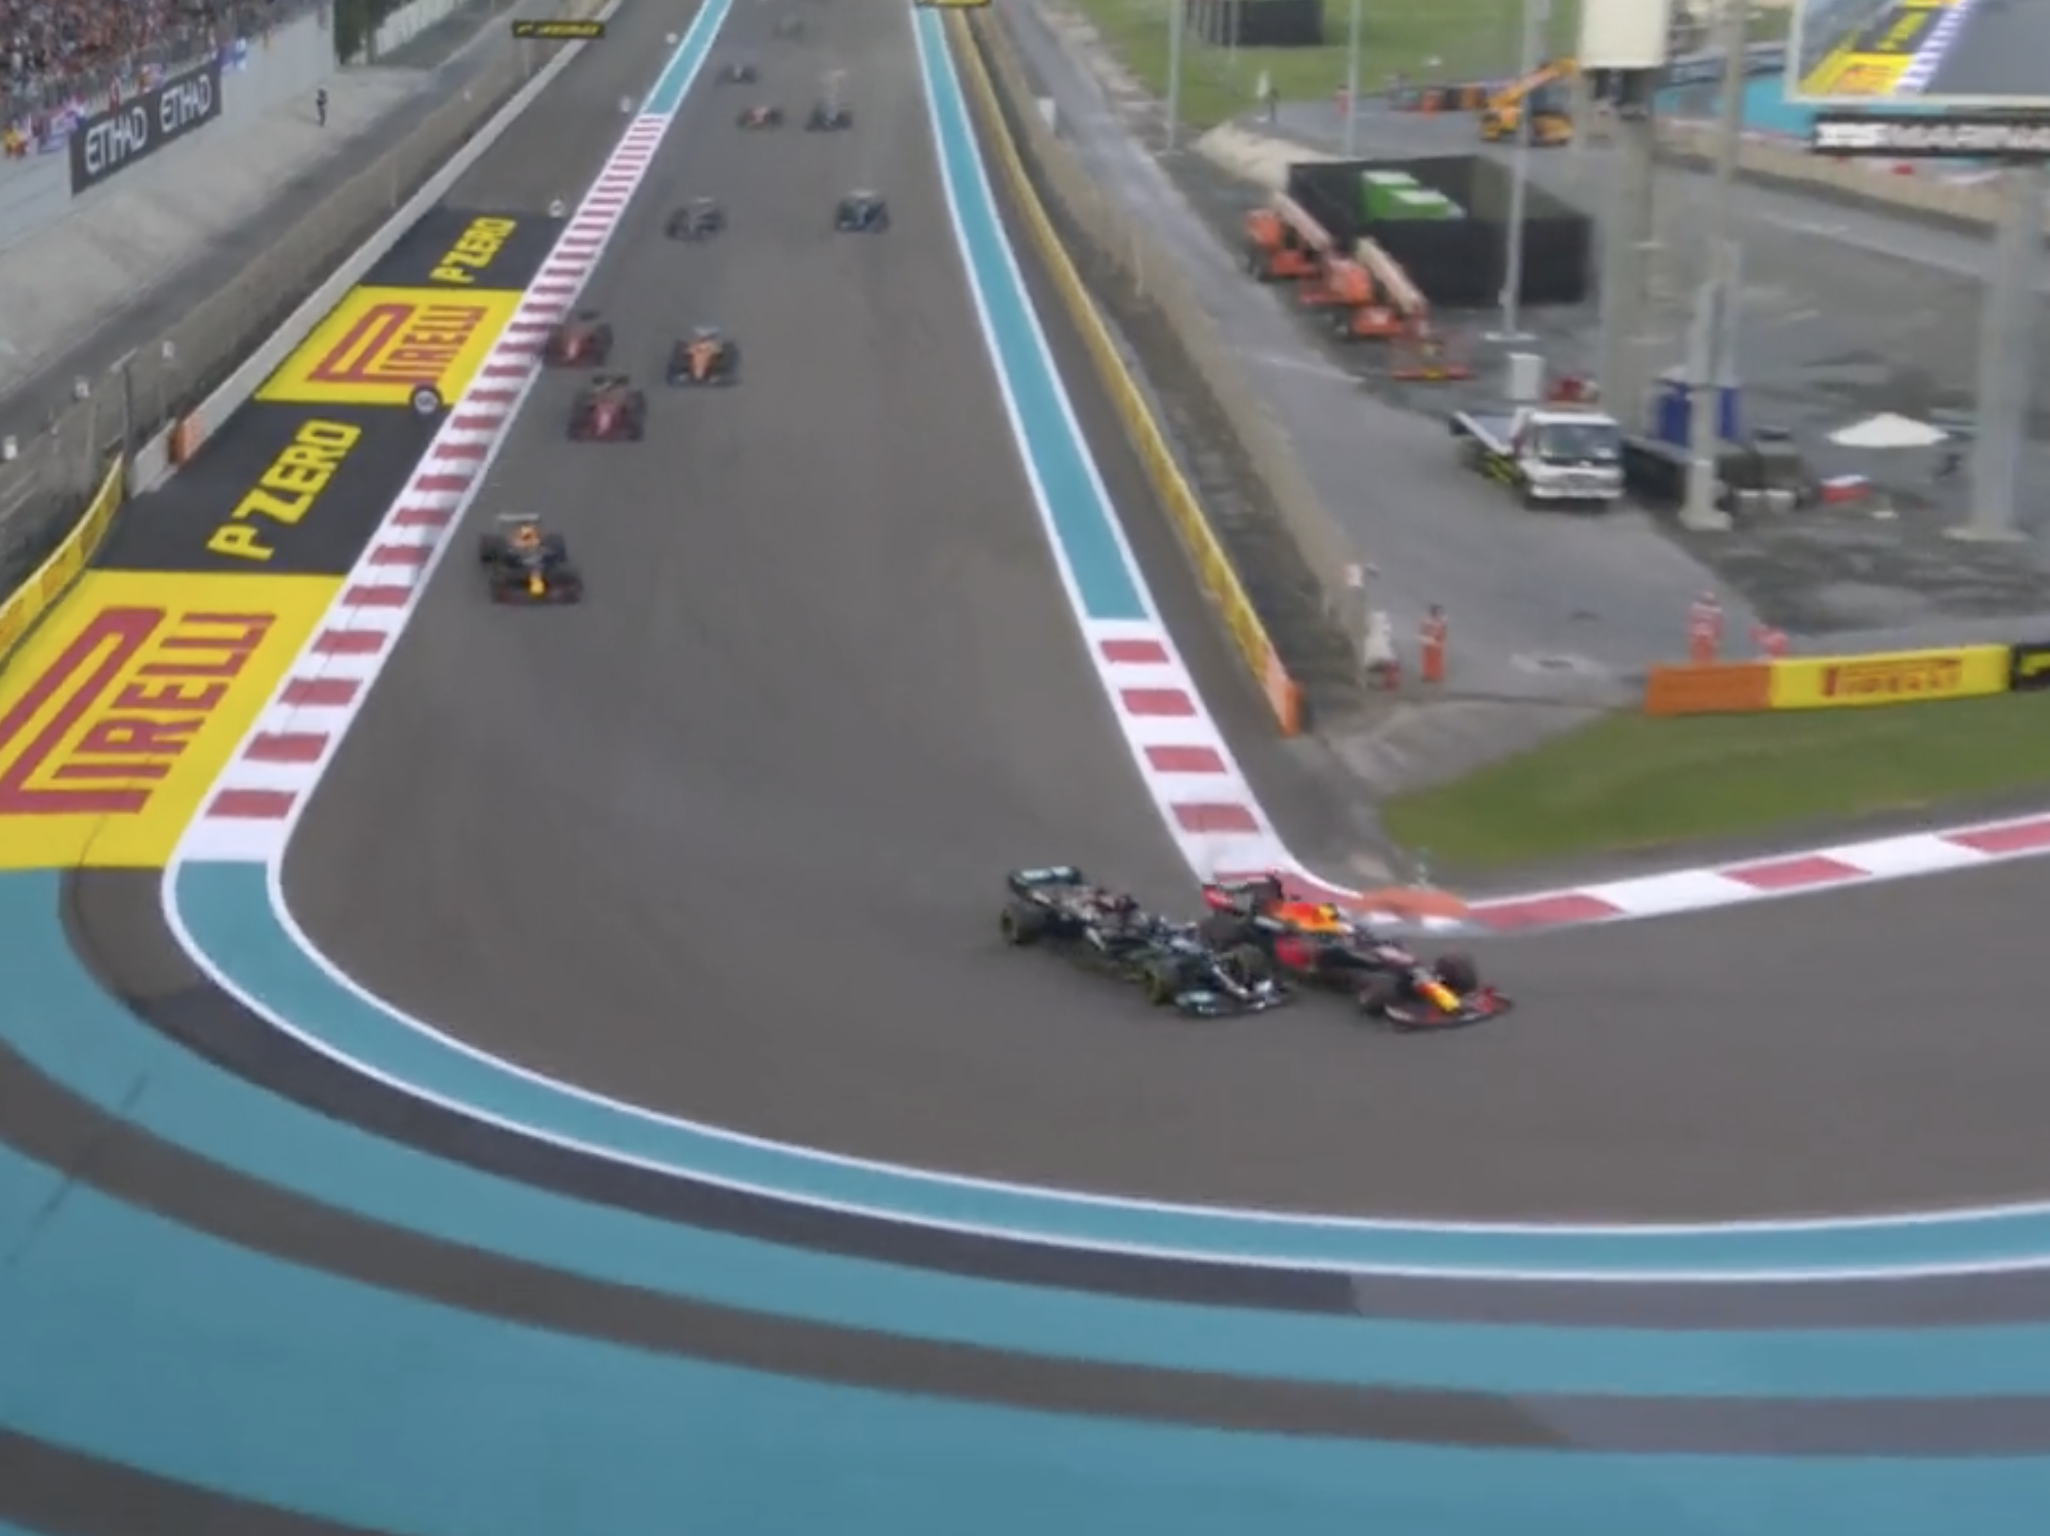 Lewis Hamilton and Max Verstappen clash during the title-deciding Abu Dhabi Grand Prix on December 12, 2021.